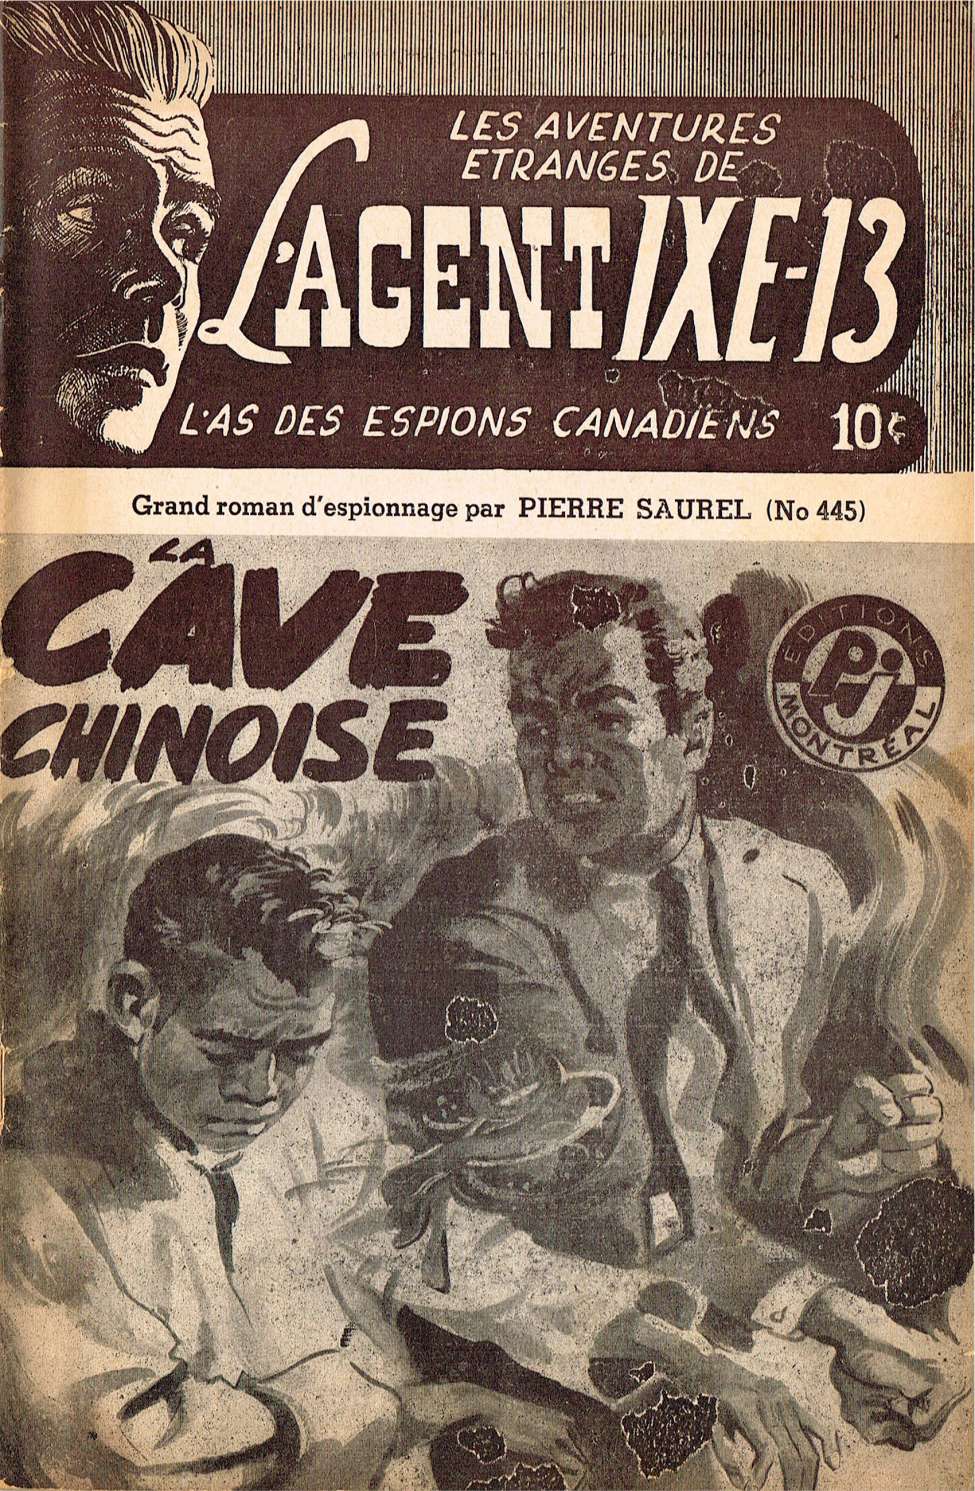 Book Cover For L'Agent IXE-13 v2 445 - La cave chinoise